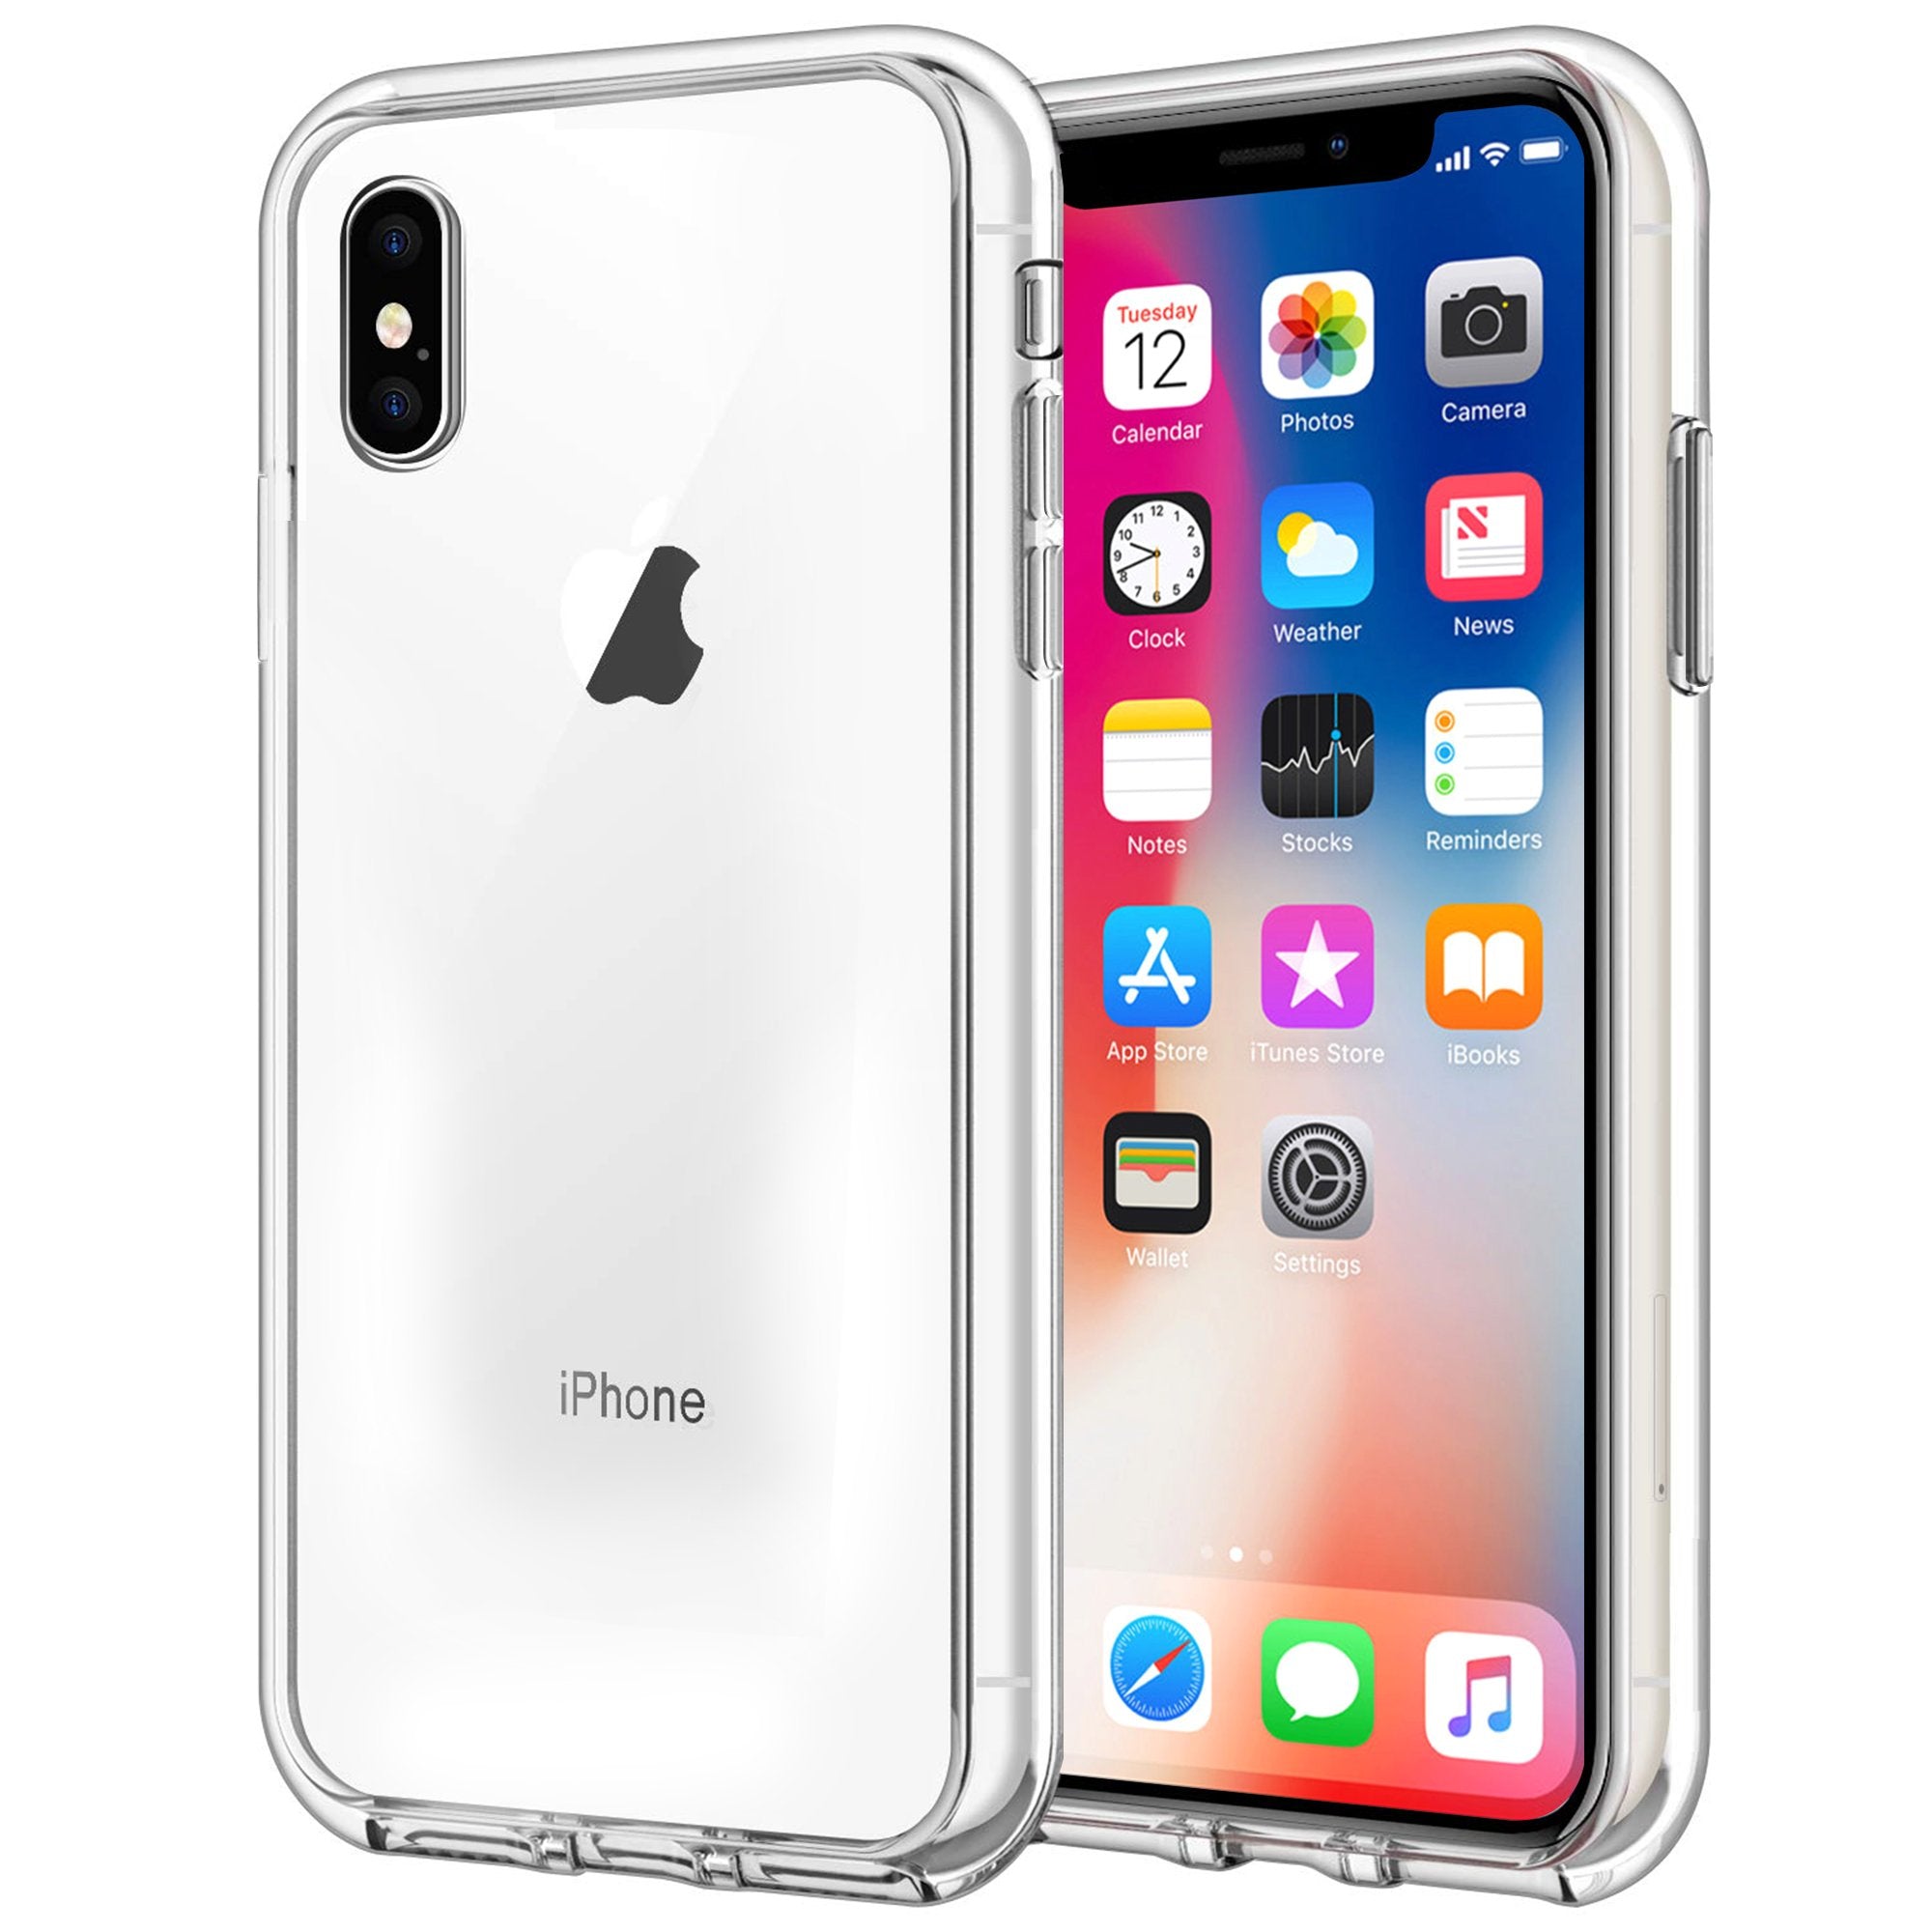 Case for iPhone X Shock Proof Soft TPU Silicone Phone Clear Slim Cover